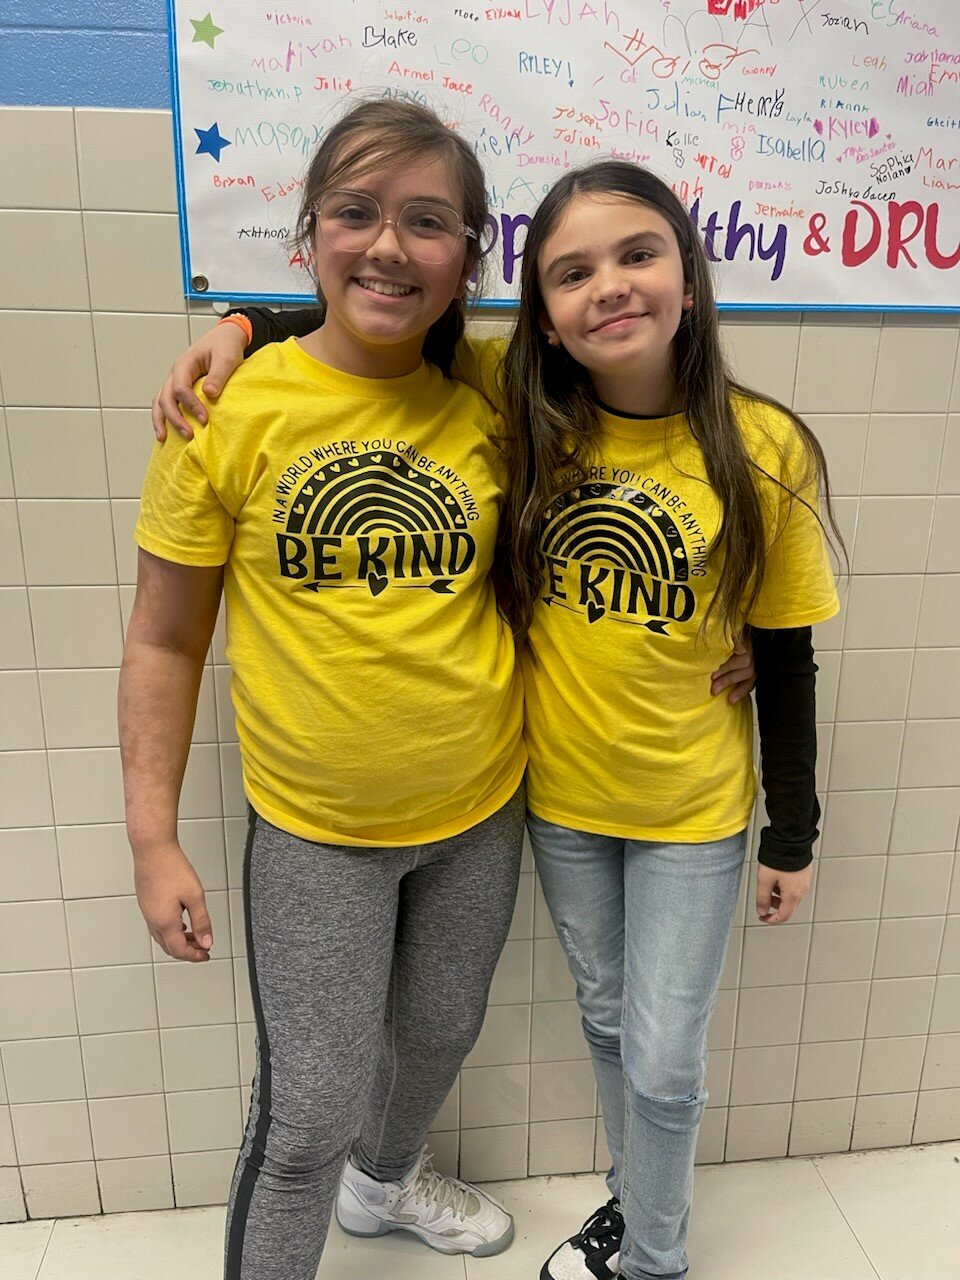 Fifth grade students Gabby and Sueli wear matching shirts for World Kindness Day!